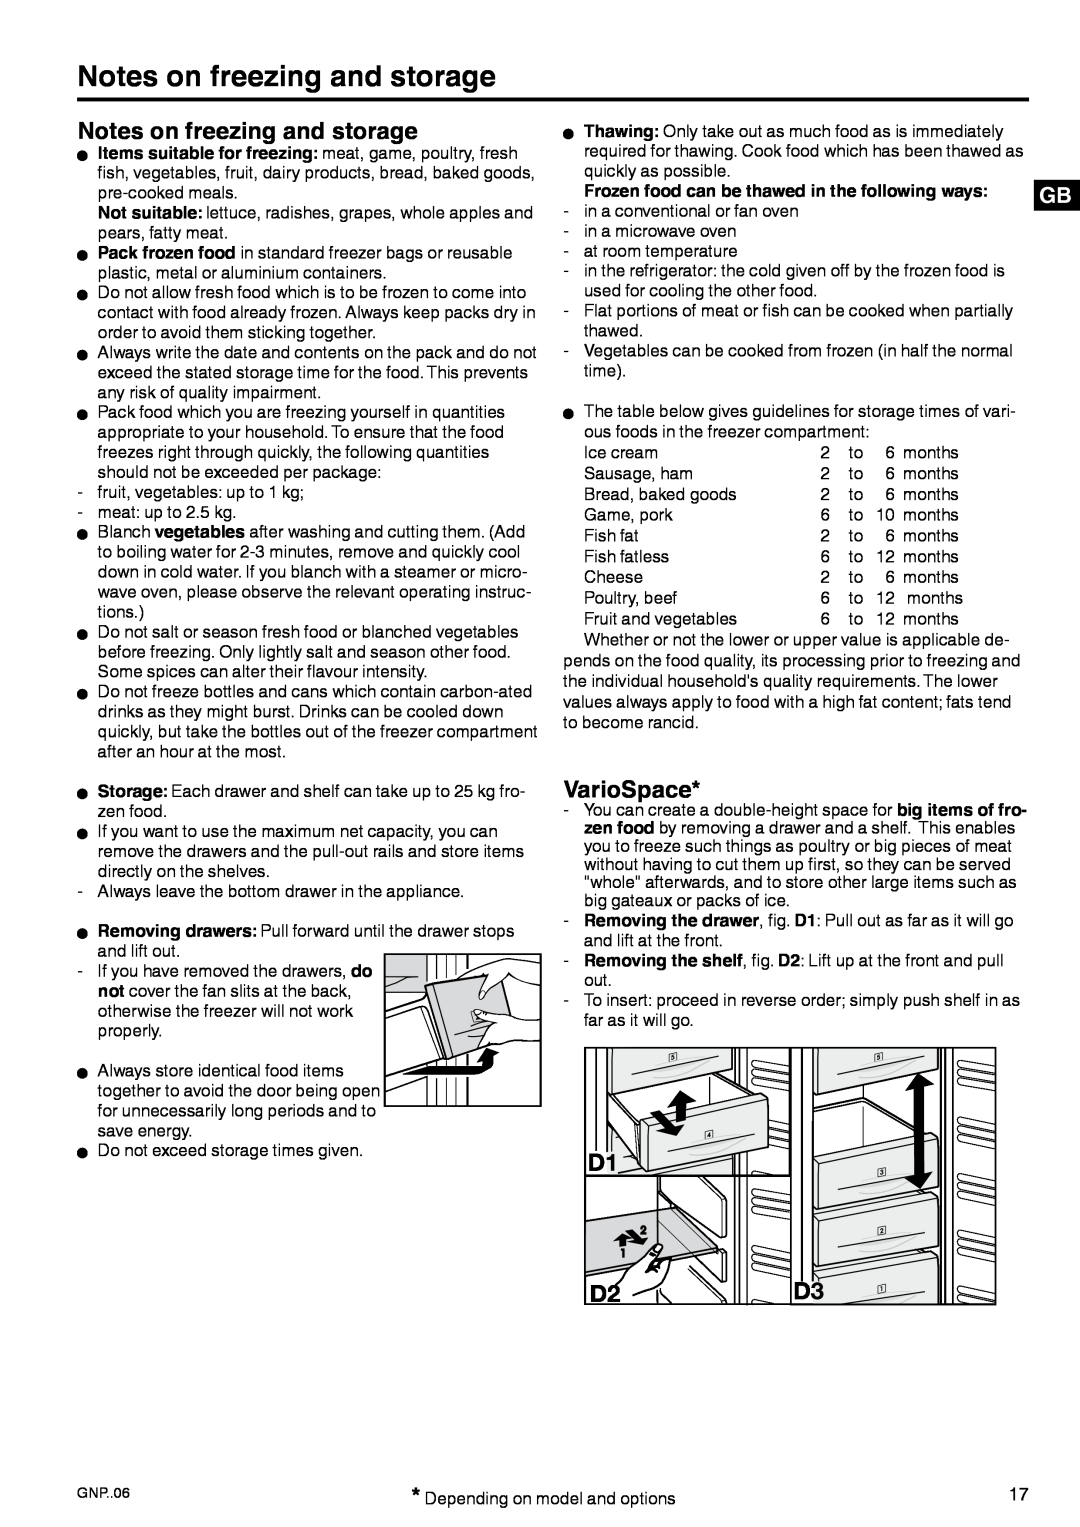 Liebherr 7084 152 - 00 manual Notes on freezing and storage, VarioSpace, Frozen food can be thawed in the following ways 